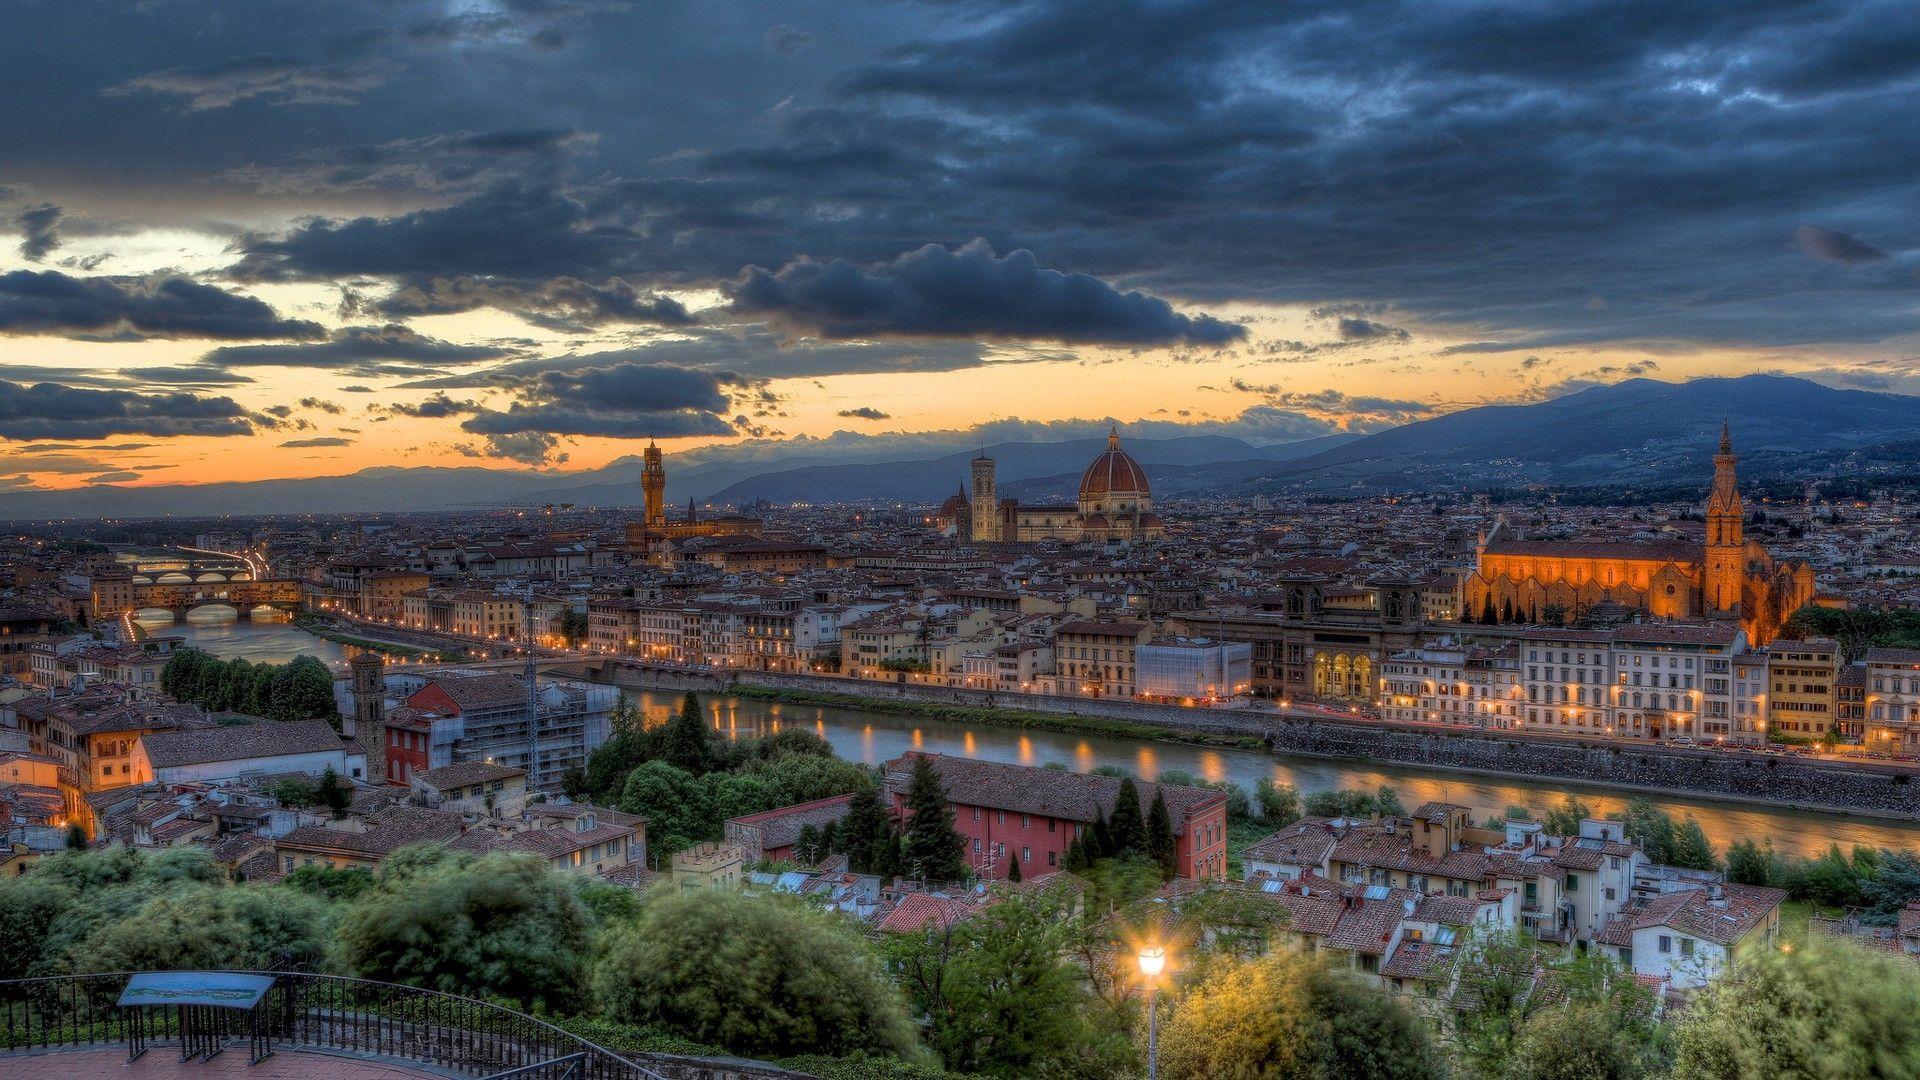 Download Wallpaper 1920x1080 florence, italy, buildings, panorama